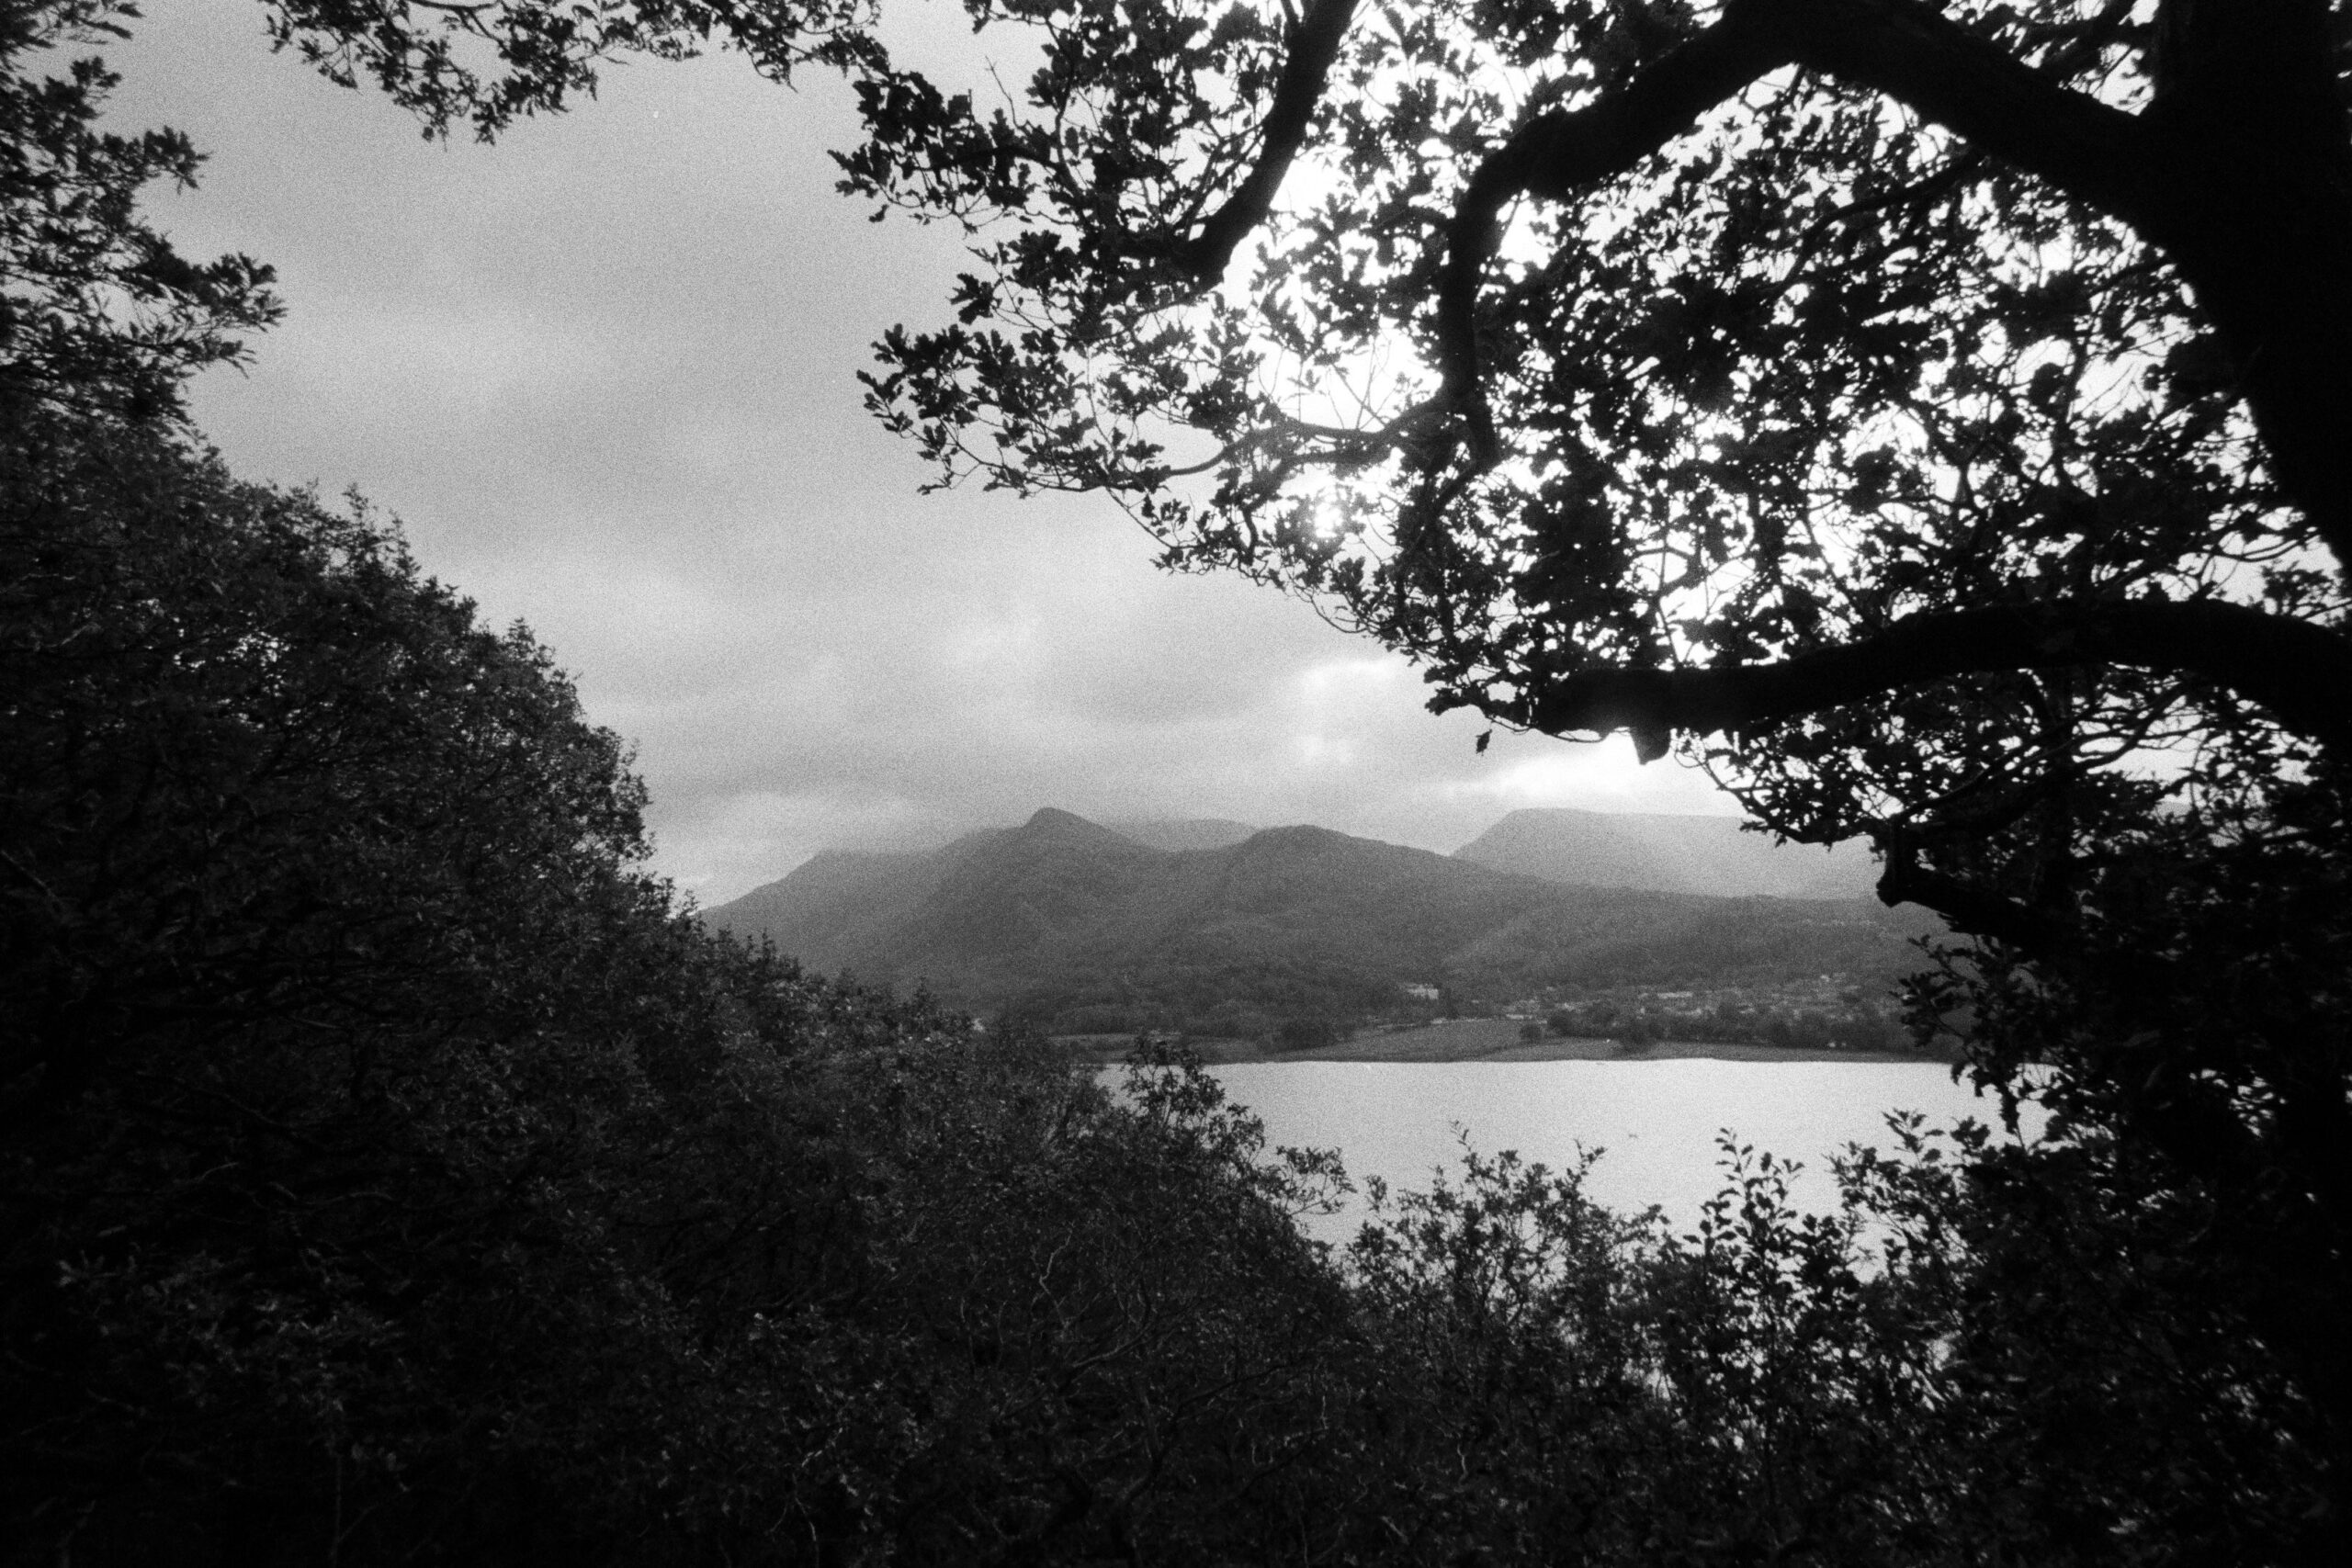 @AS0151 · 2h Don’t know if I’m too late for #framedfilm #ilfordphoto #fridayfavourites Anyway, low clouds over Snowdonia framed by the woods around Llyn Padarn. #believeinfilm Camera Pentax SuperA, 17mm lens, 🎞 Kentmere 400.